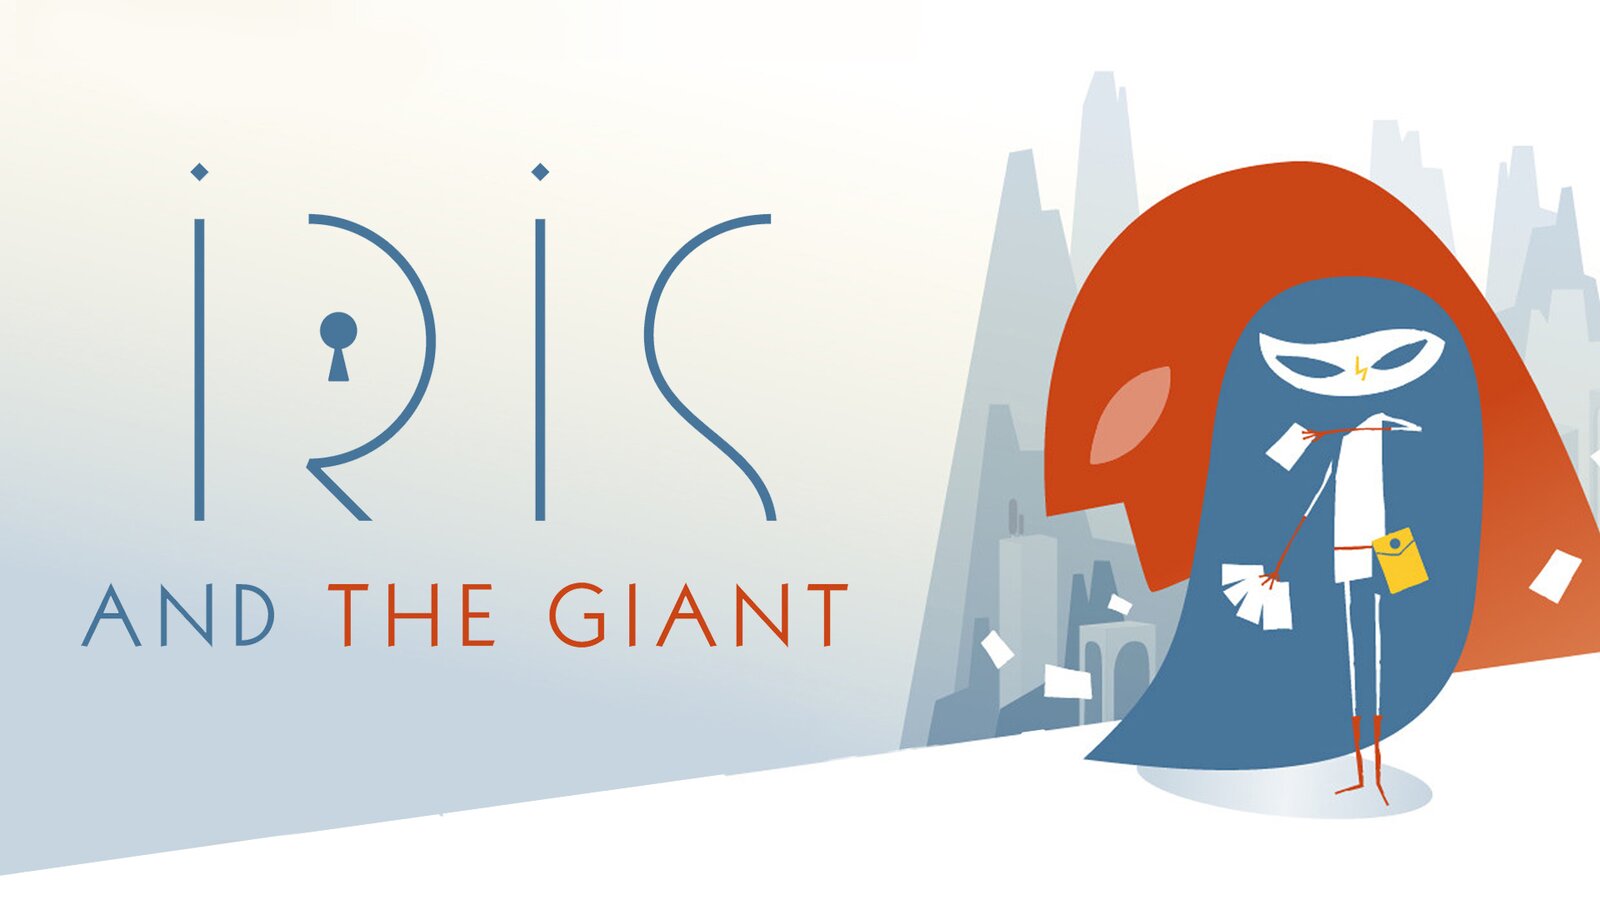 Iris and the Giant